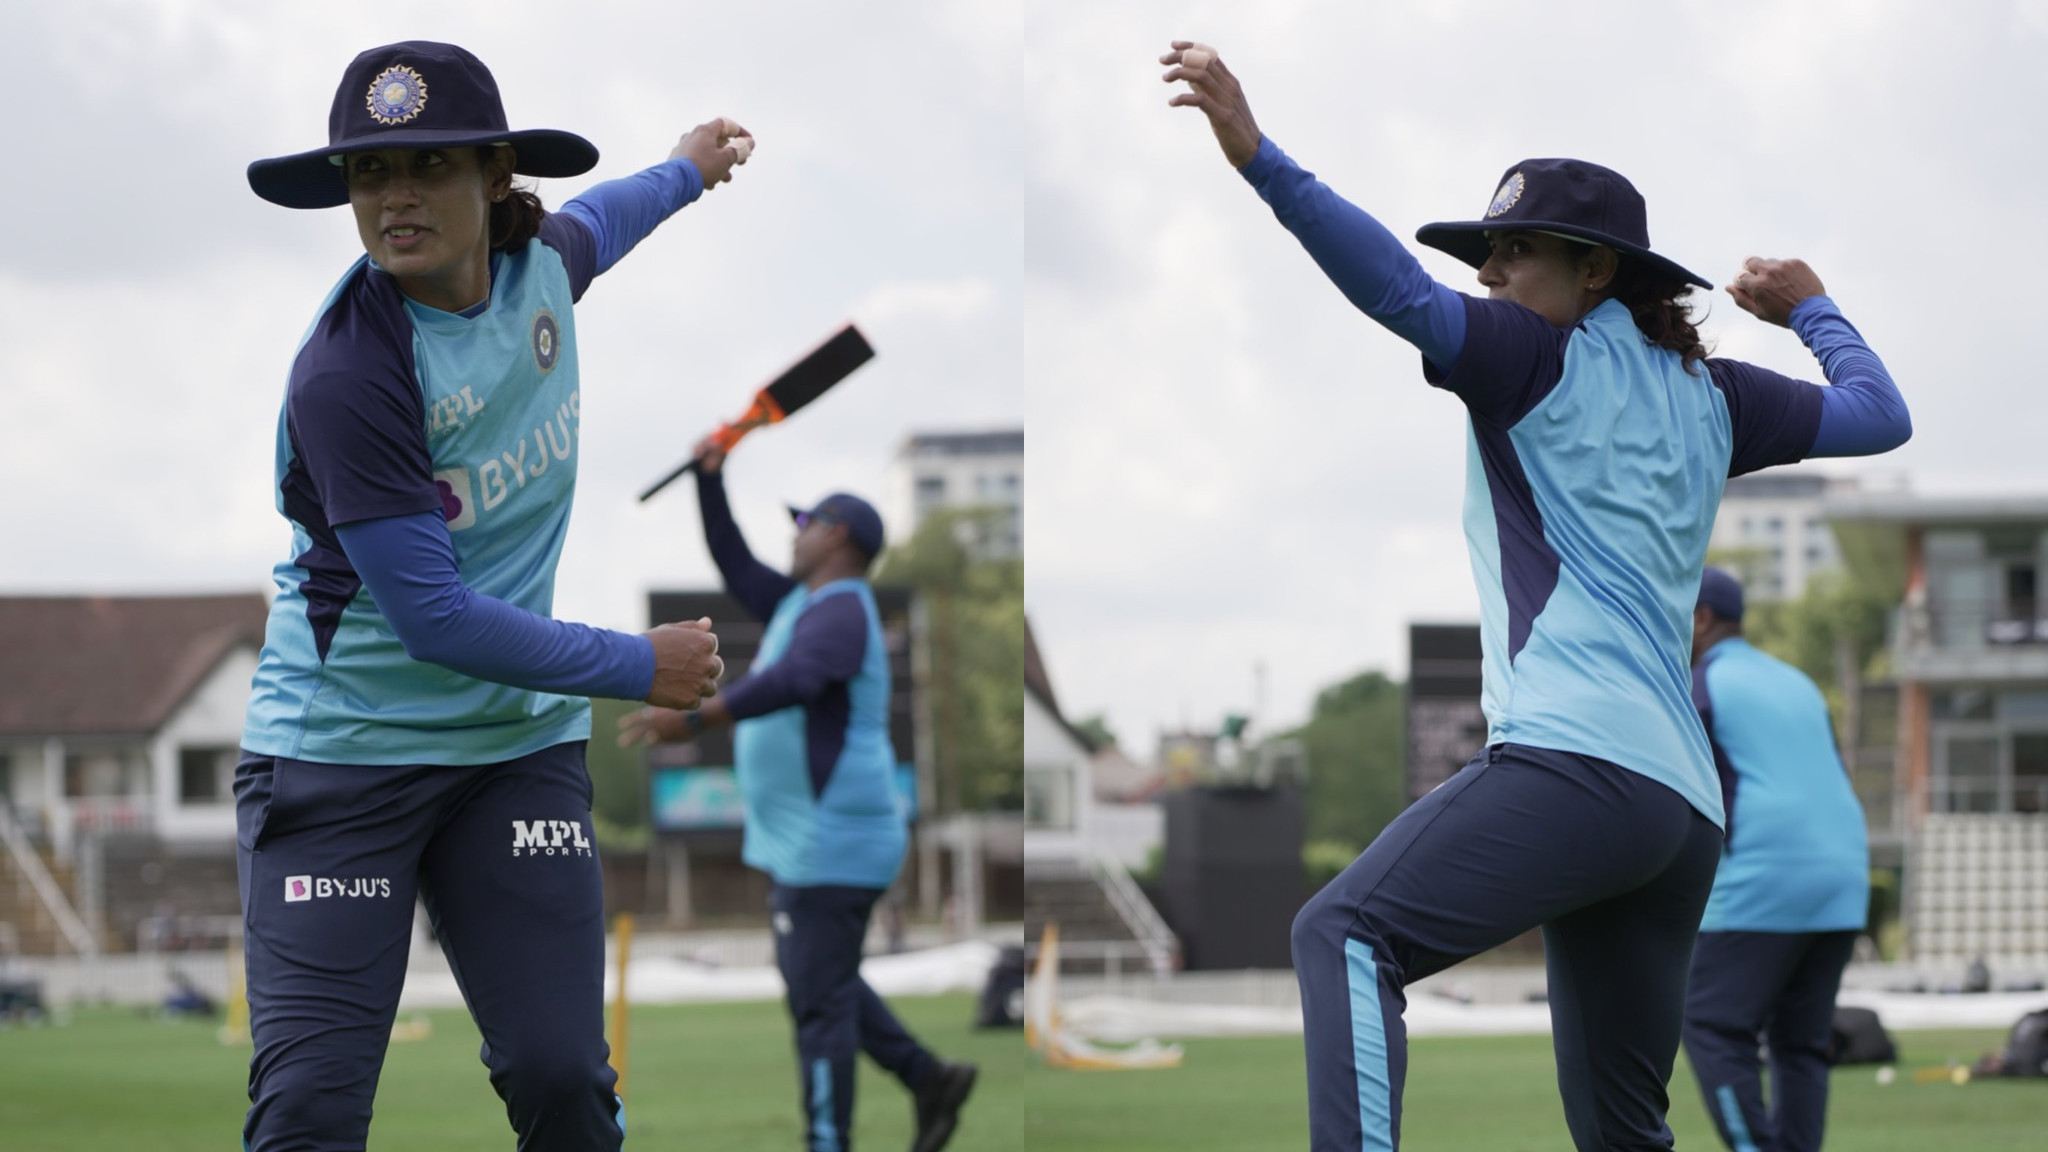 ENGW v INDW 2021: Mithali Raj set to play third ODI against England after recovering from neck pain